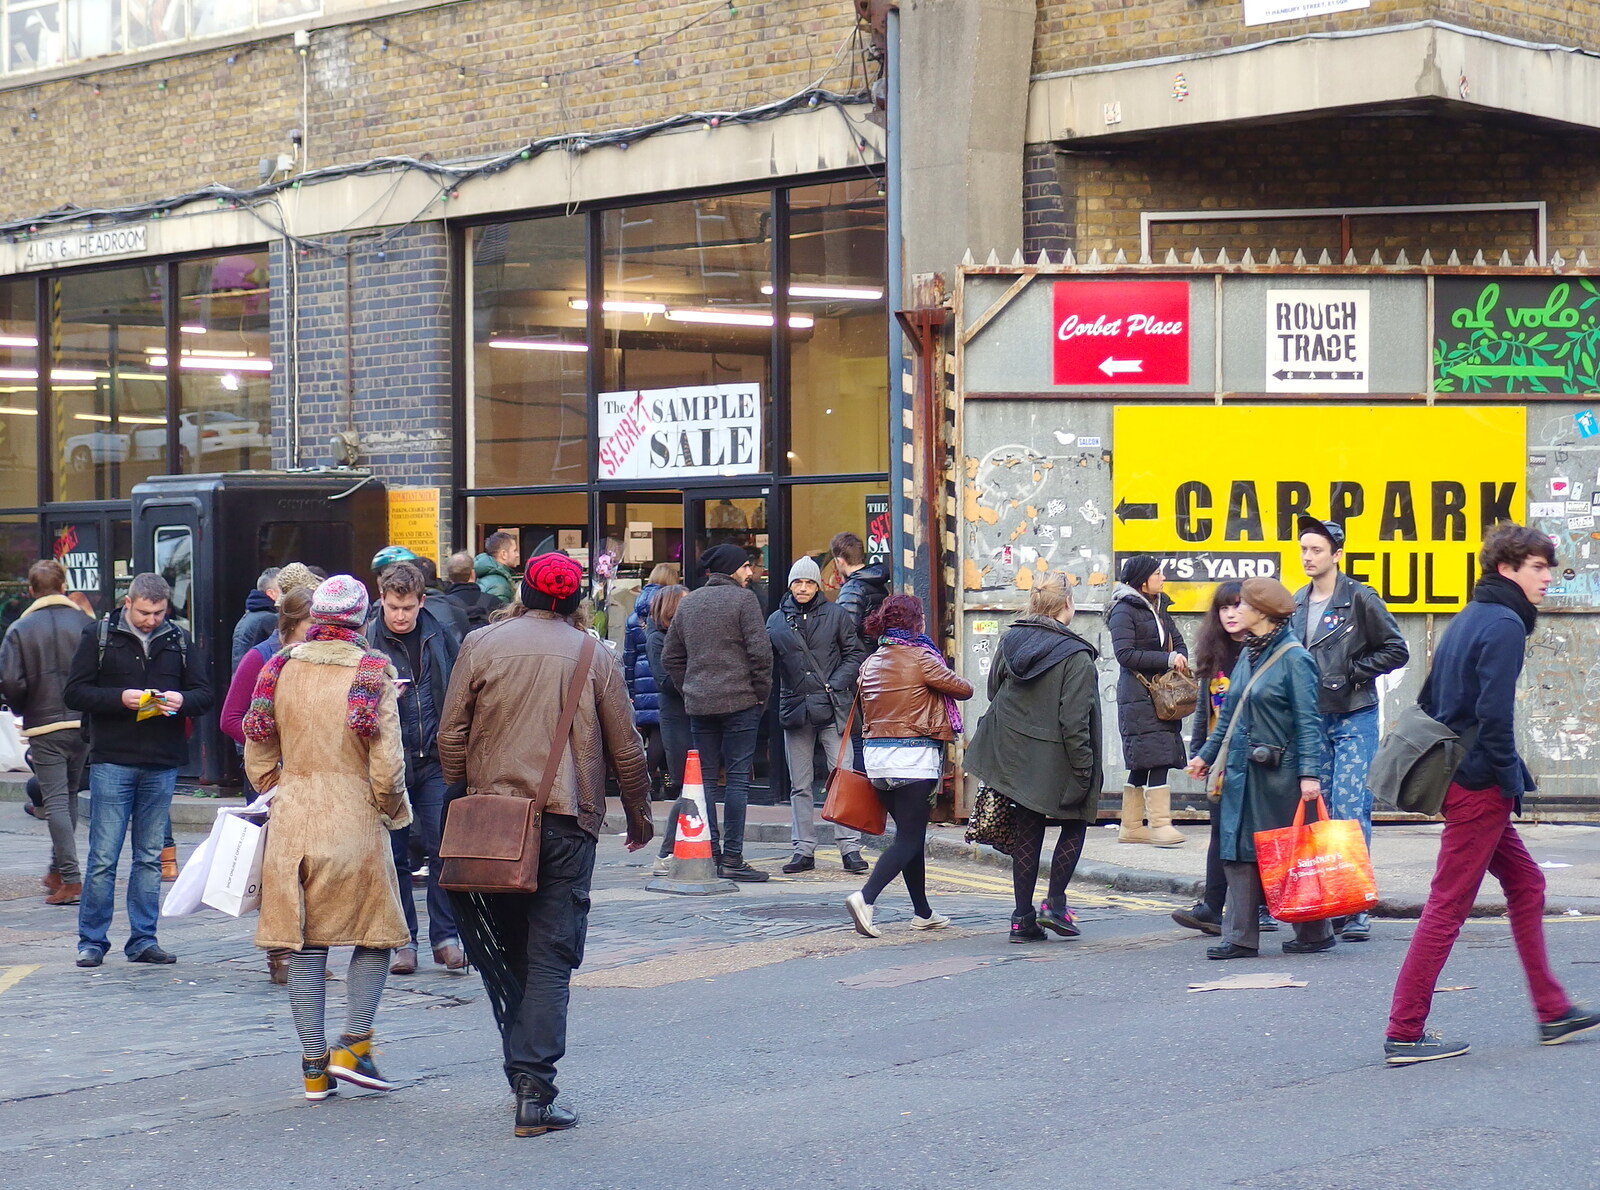 Crowds on Hanbury Street from Lunch in the East End, Spitalfields and Brick Lane, London - 1st December 2013